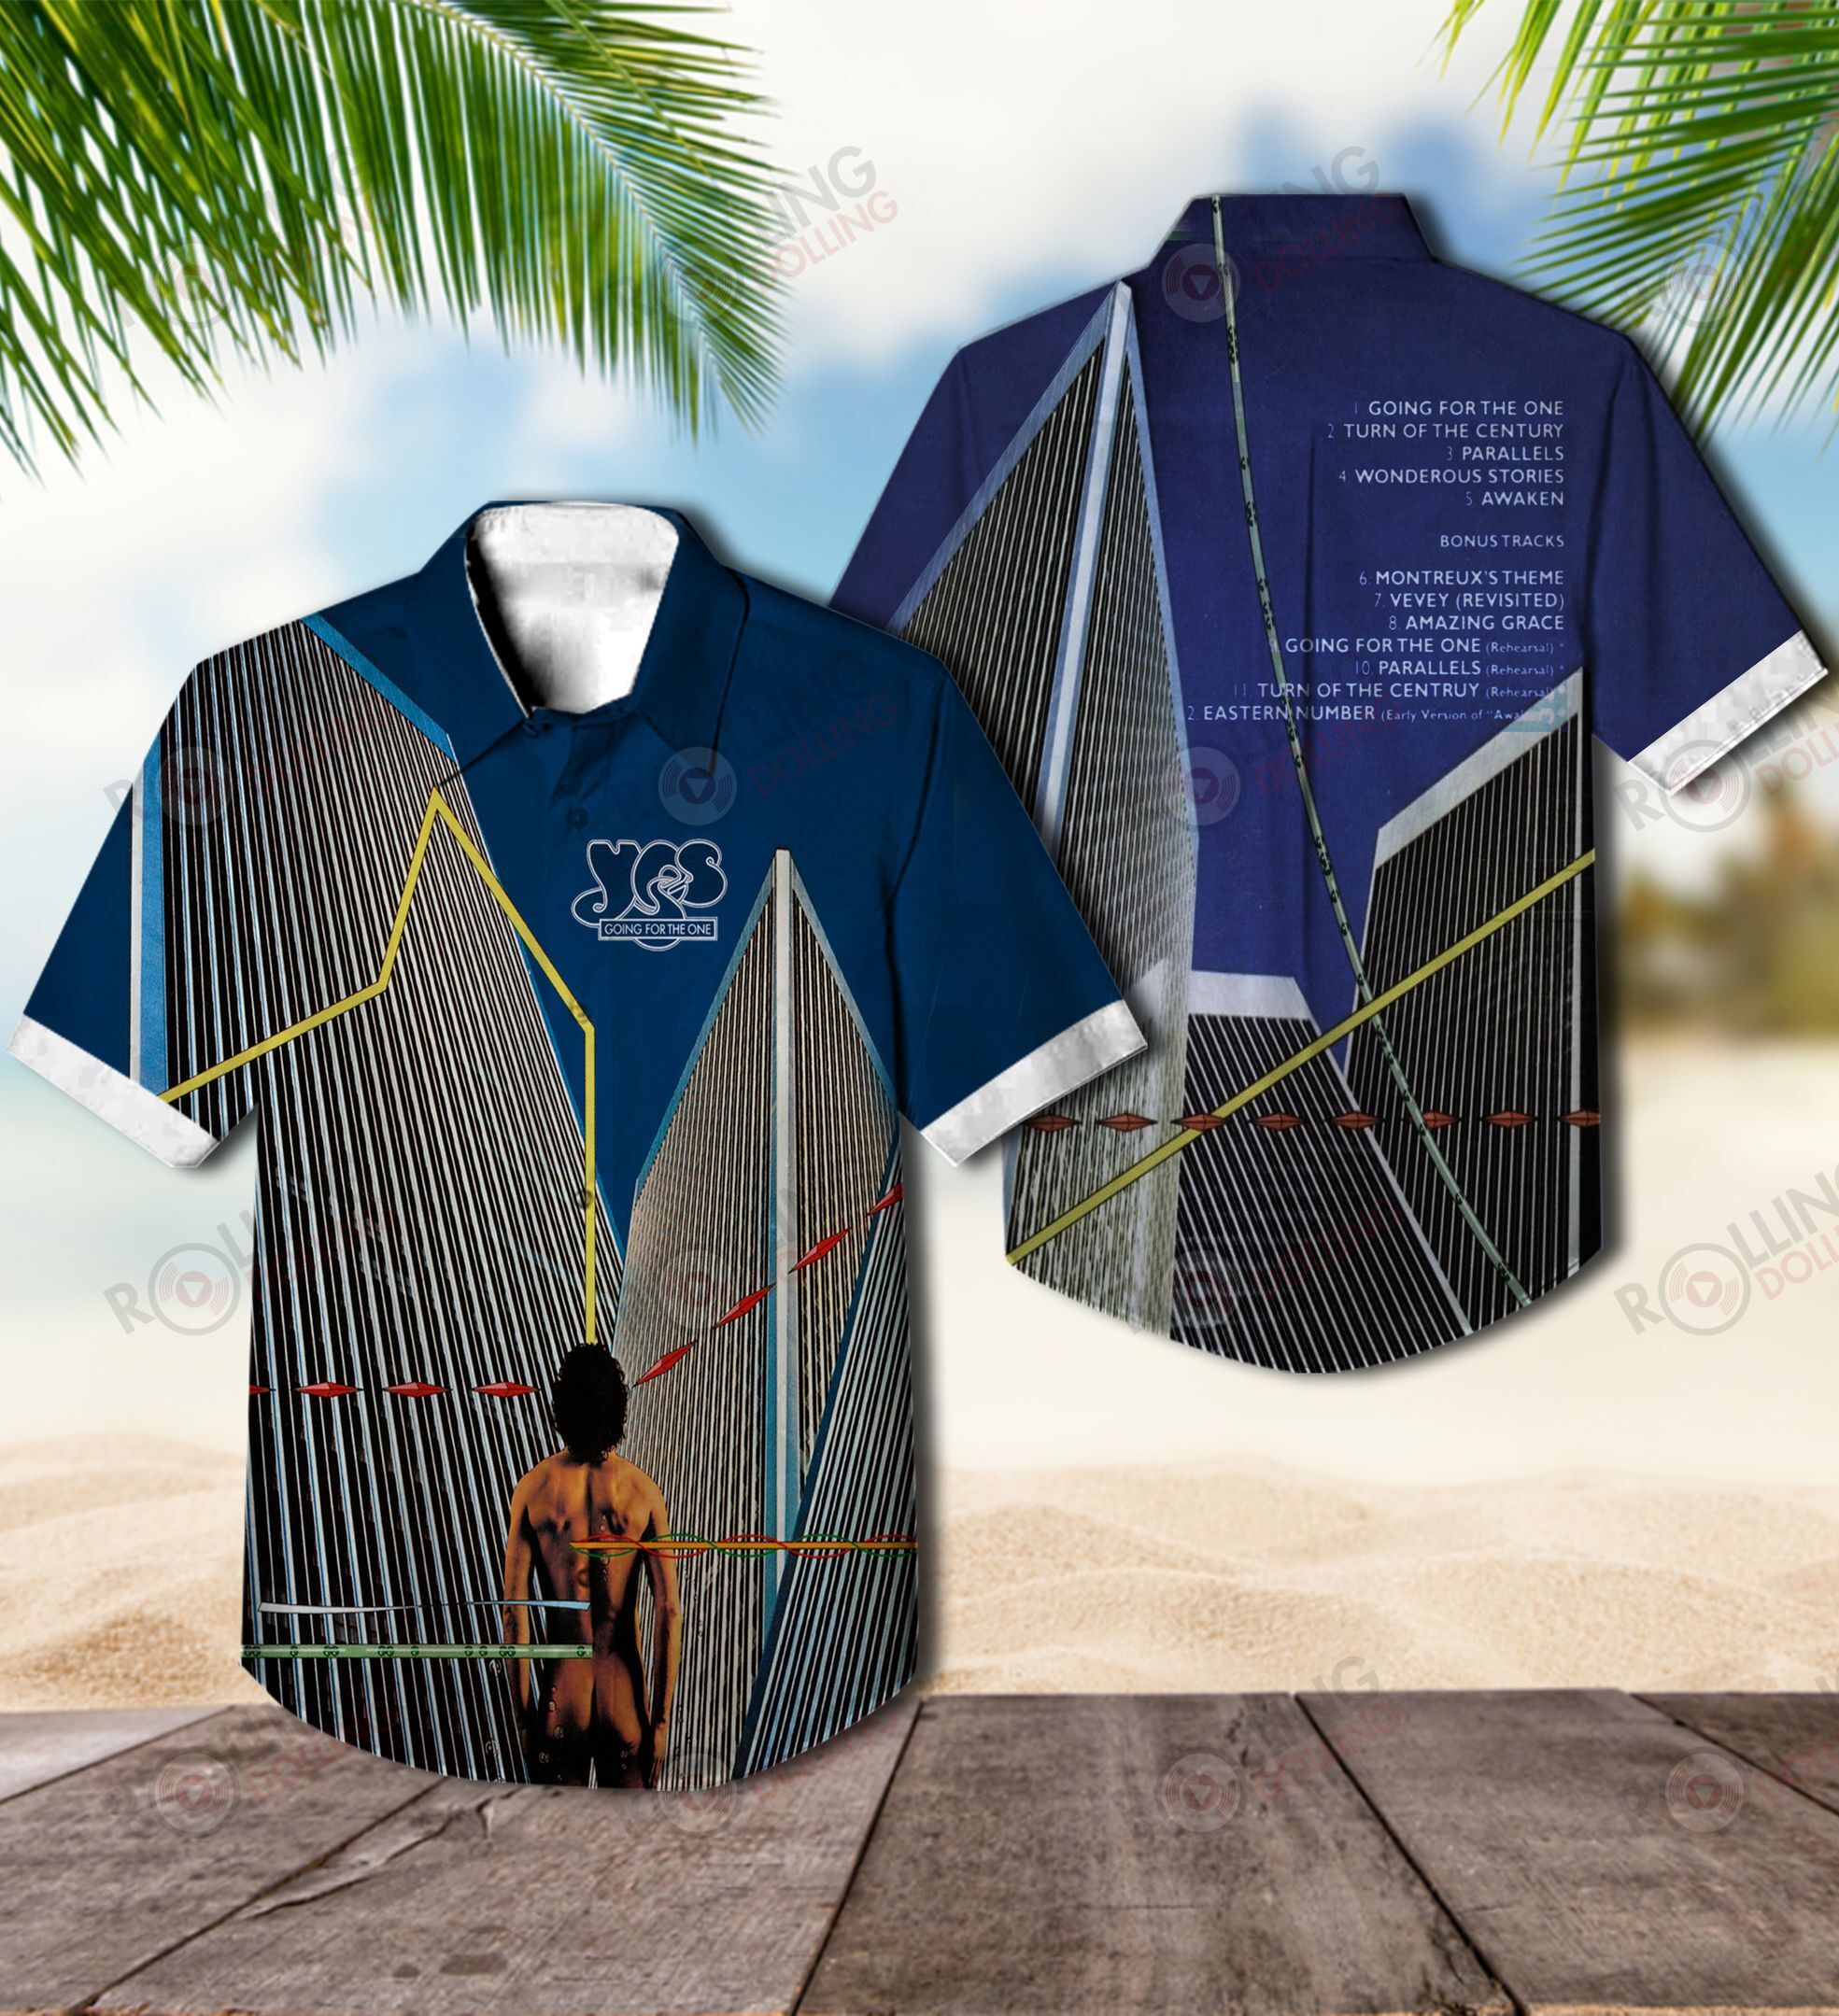 Now you can show off your love of all things band with this Hawaiian Shirt 115